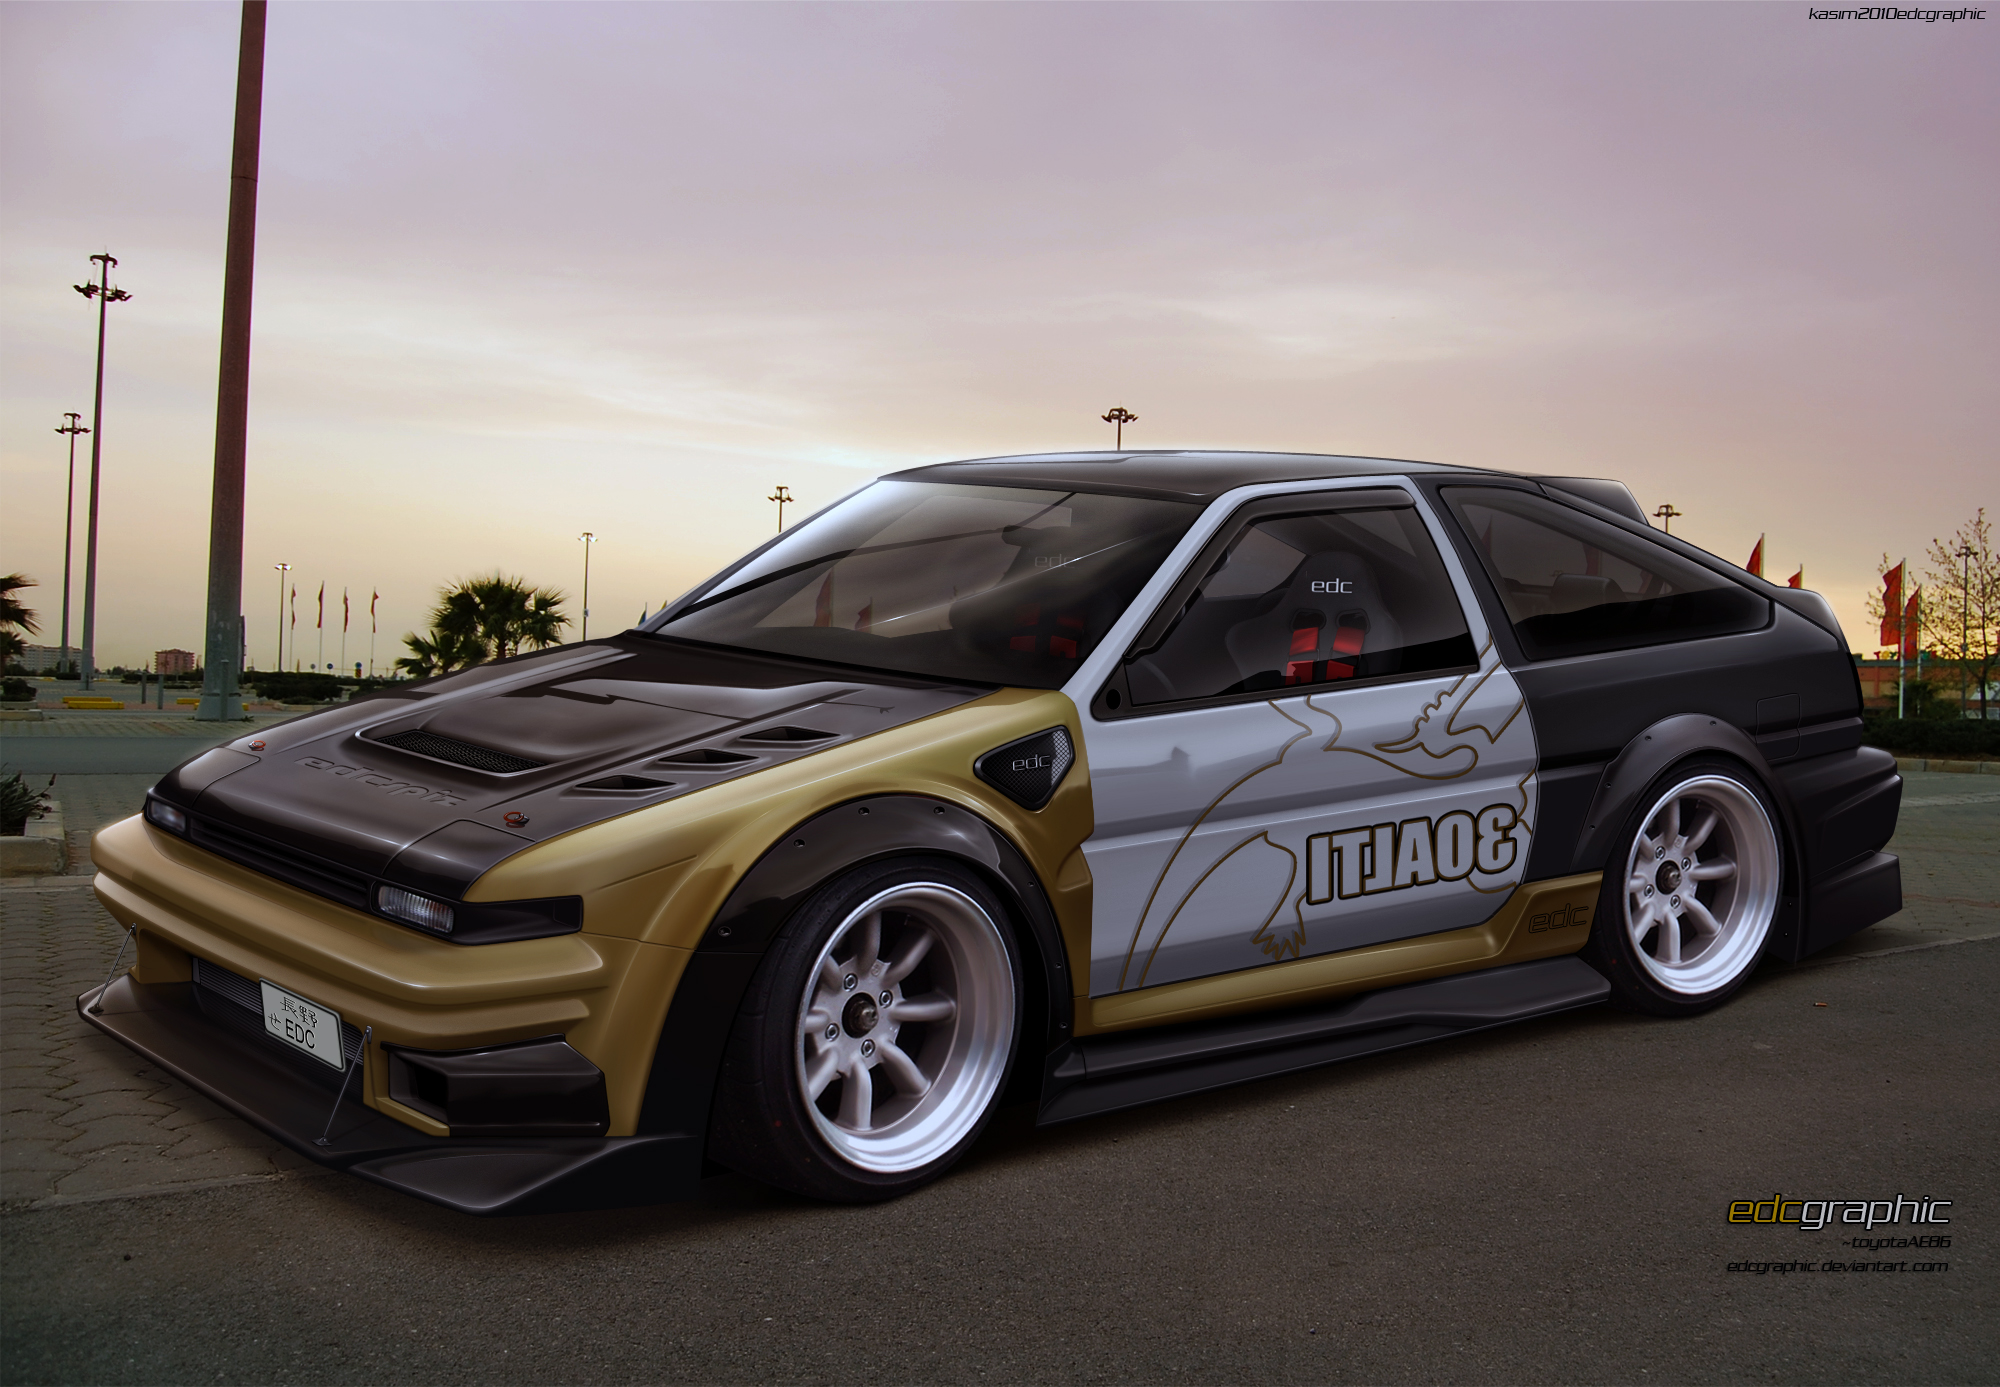 Toyota Ae86 By Edcgraphic